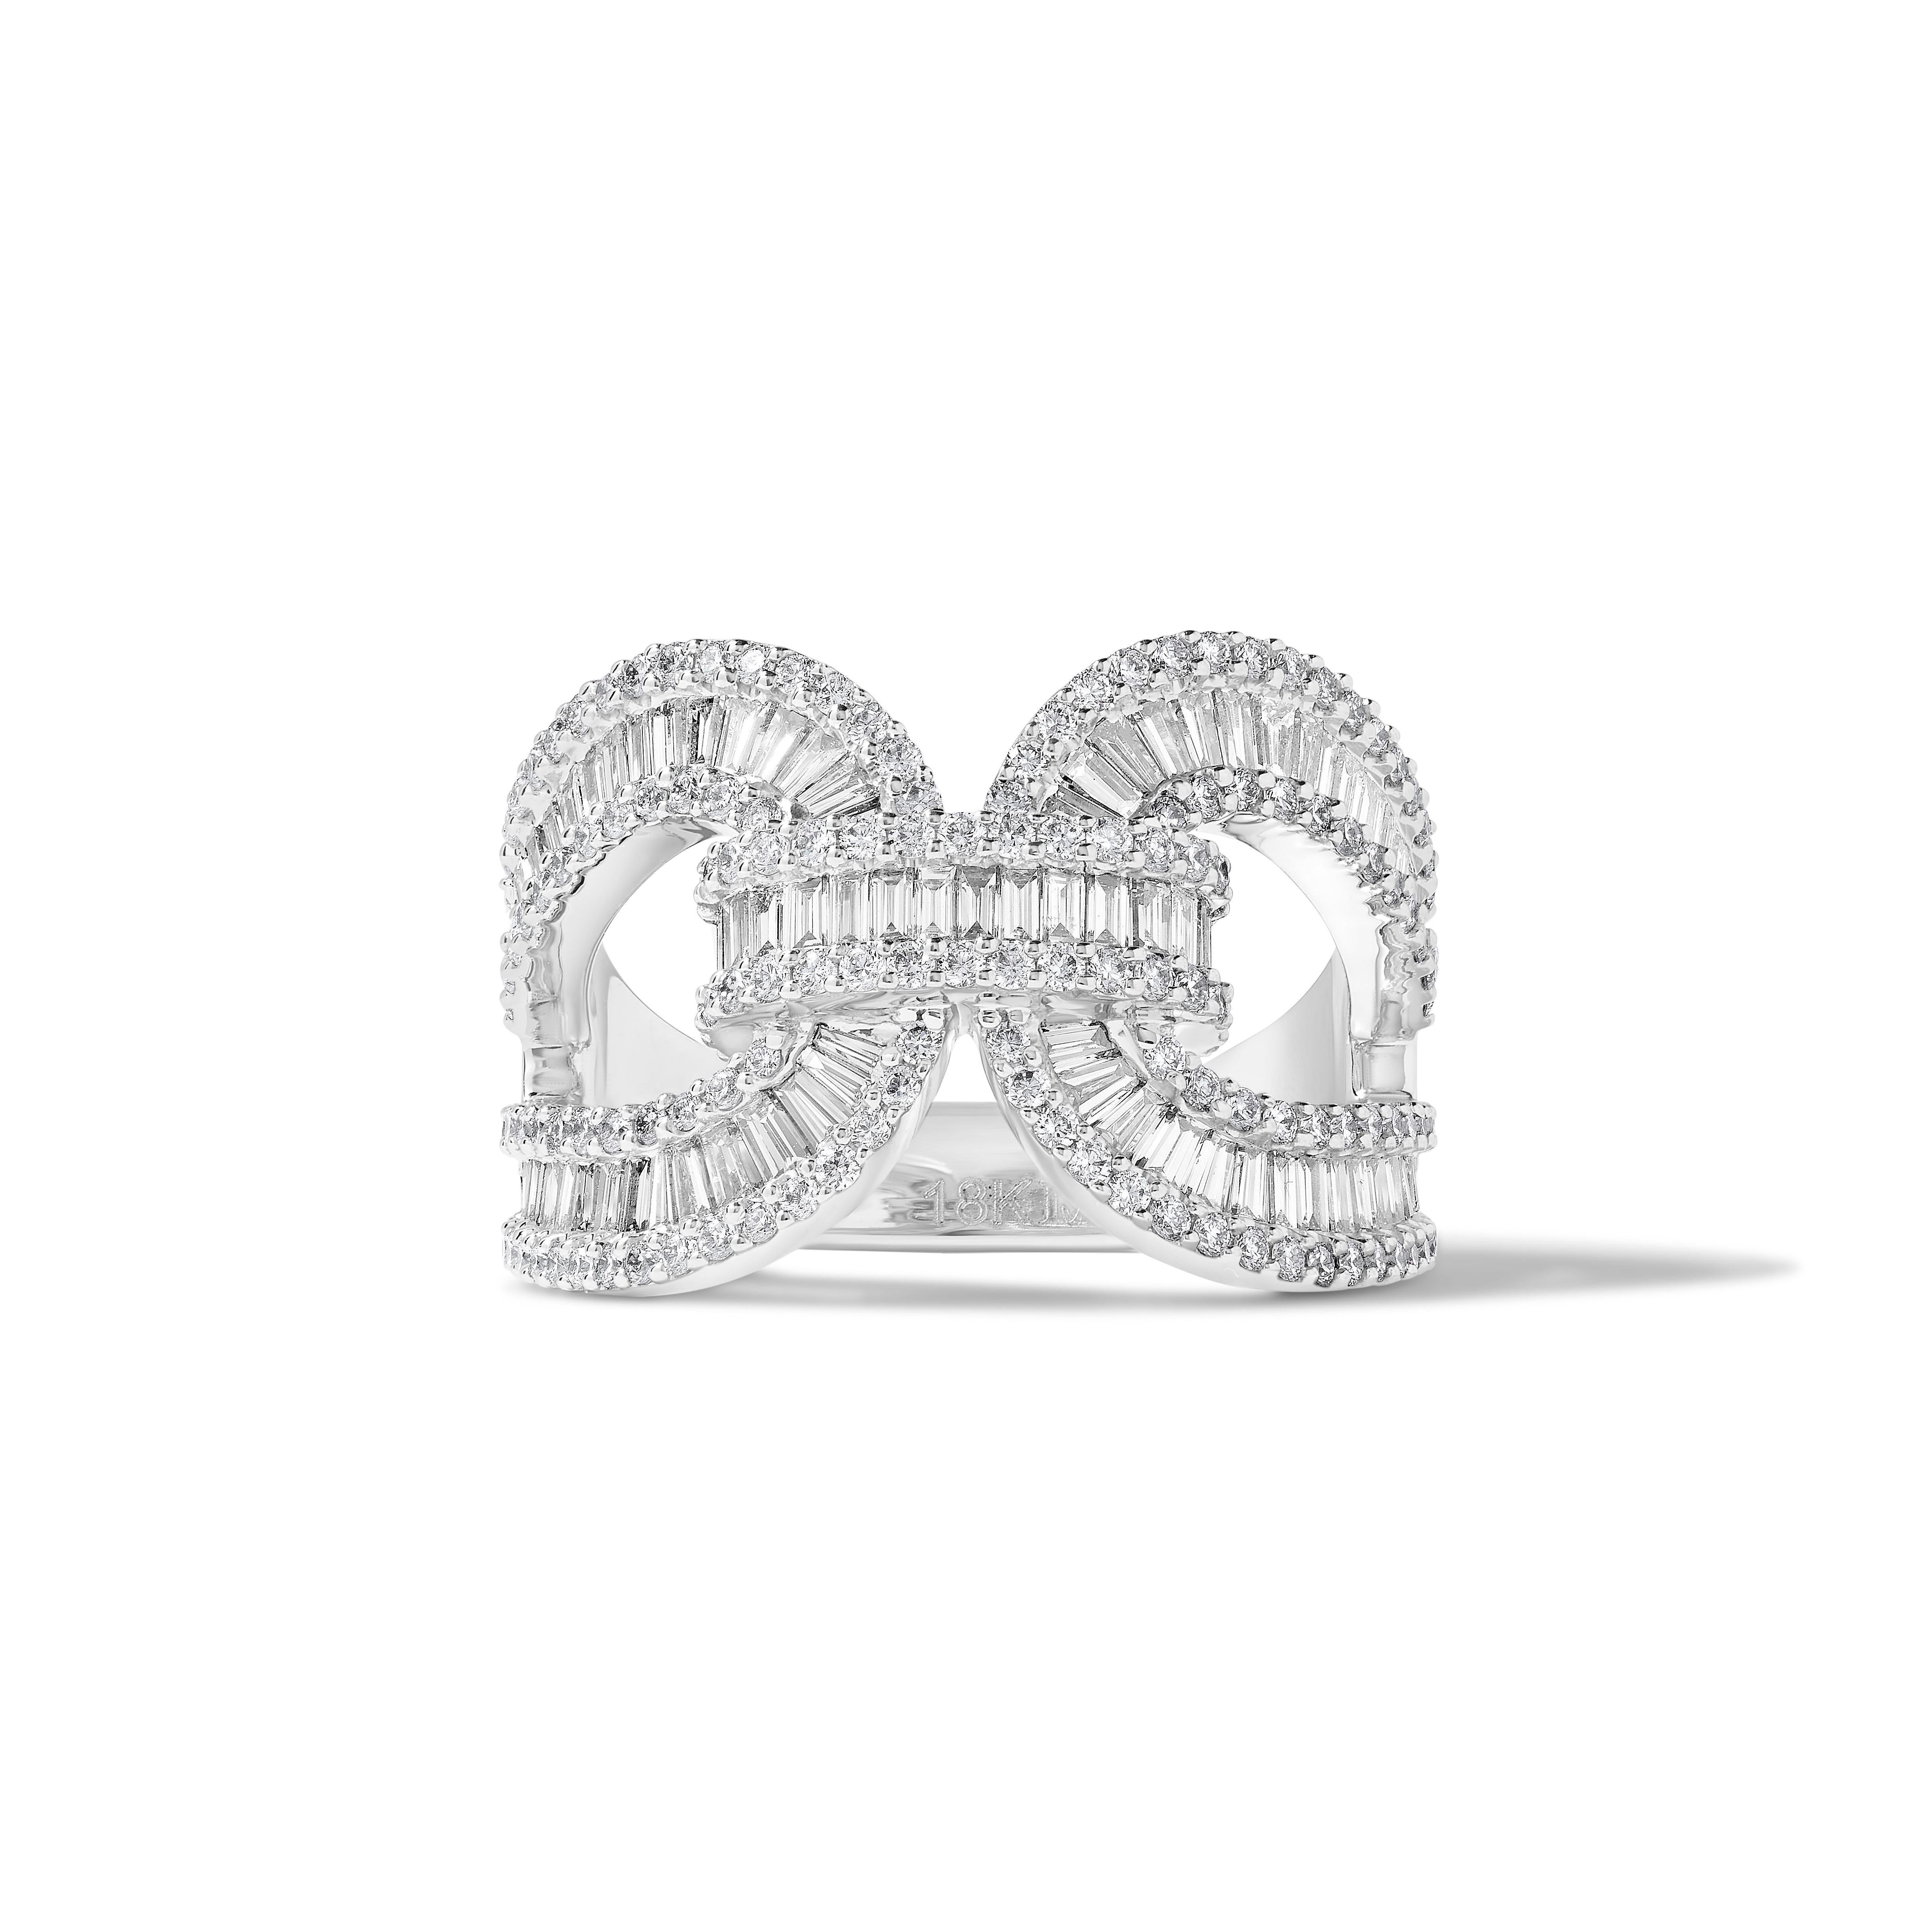 RareGemWorld's classic diamond band. Mounted in a beautiful 18K White Gold setting with natural baguette white diamonds complimented by natural round white diamond melee. This band is guaranteed to impress and enhance your personal